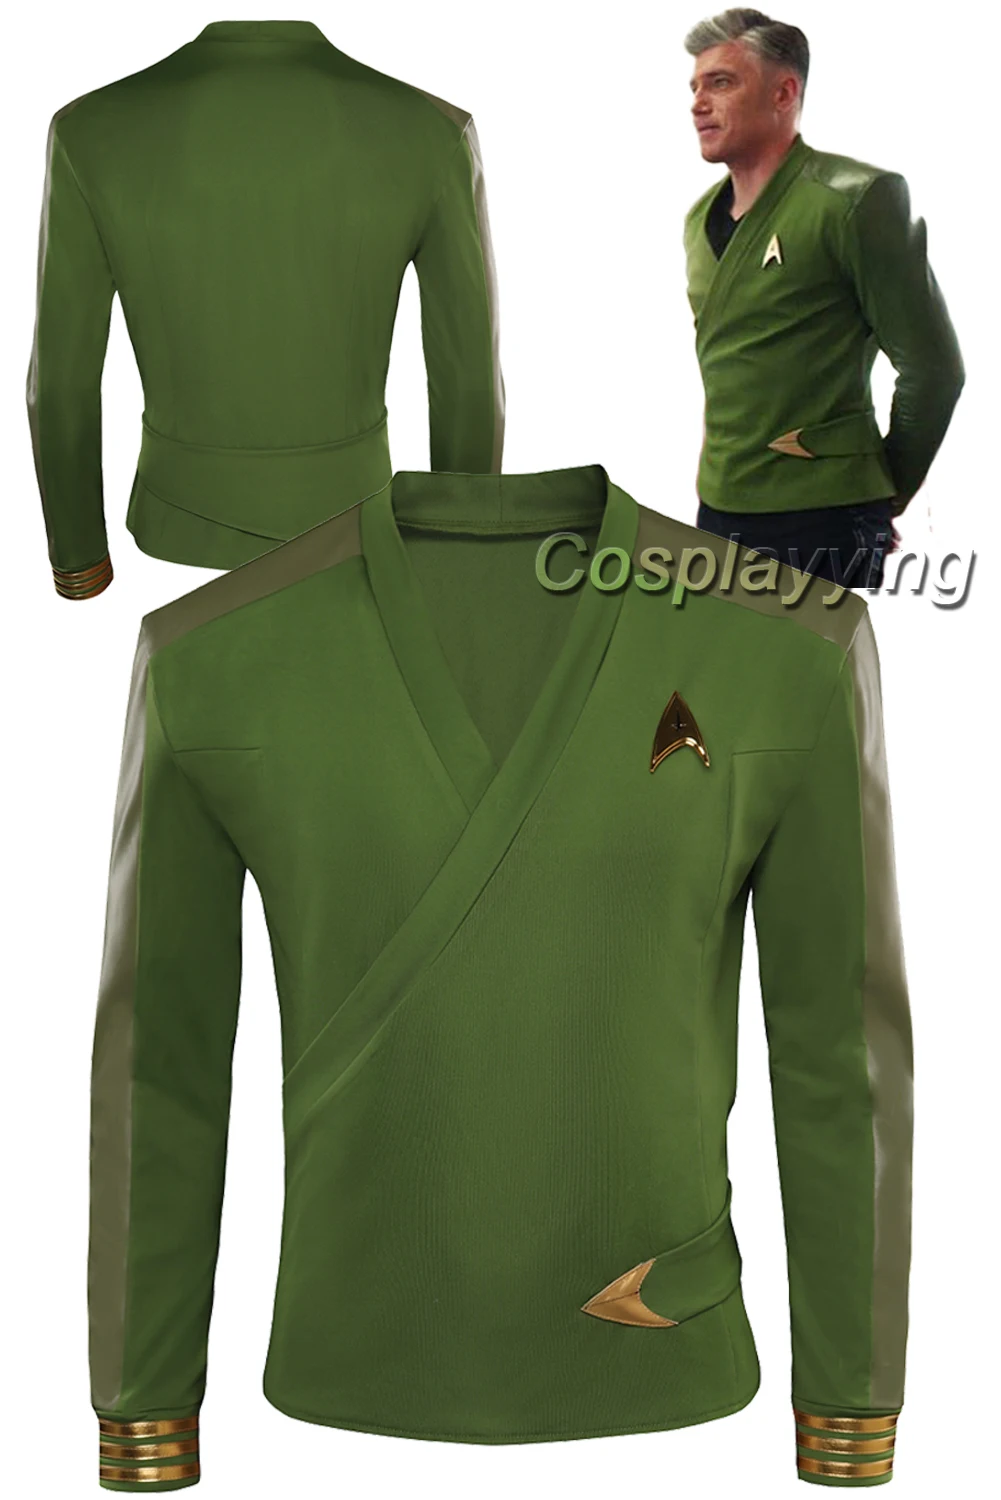 

Christopher Pike Cosplay Fantasia Green Jacket TV Strange New Words Costume Adult Men Fantasy Halloween Carnival Party Clothes